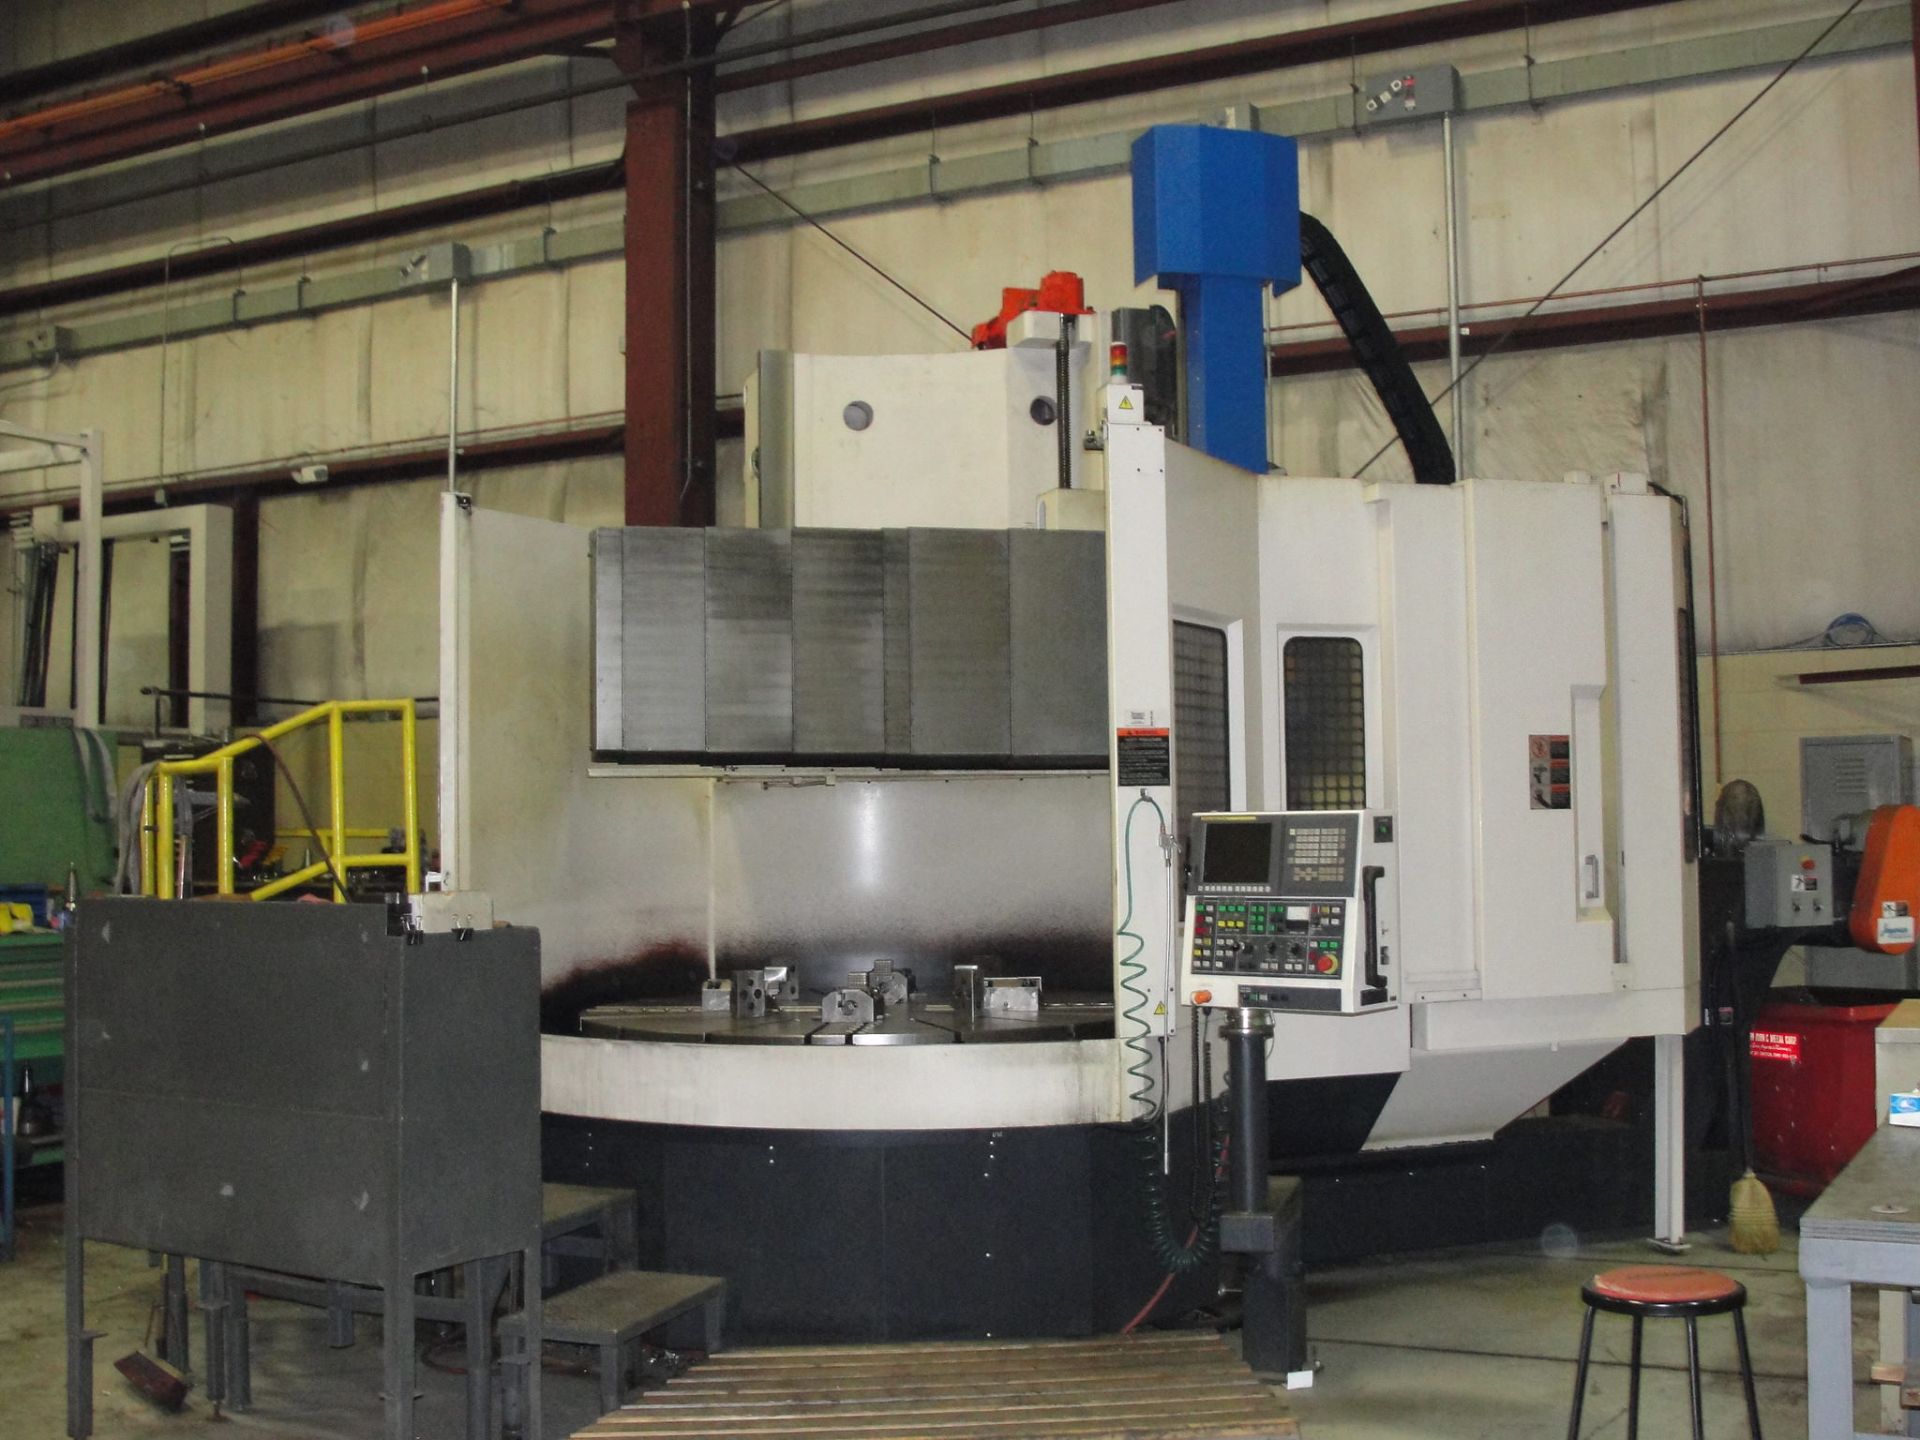 2012 Toshiba TUE-200 78" CNC Vertical Boring Mill - Image 2 of 10